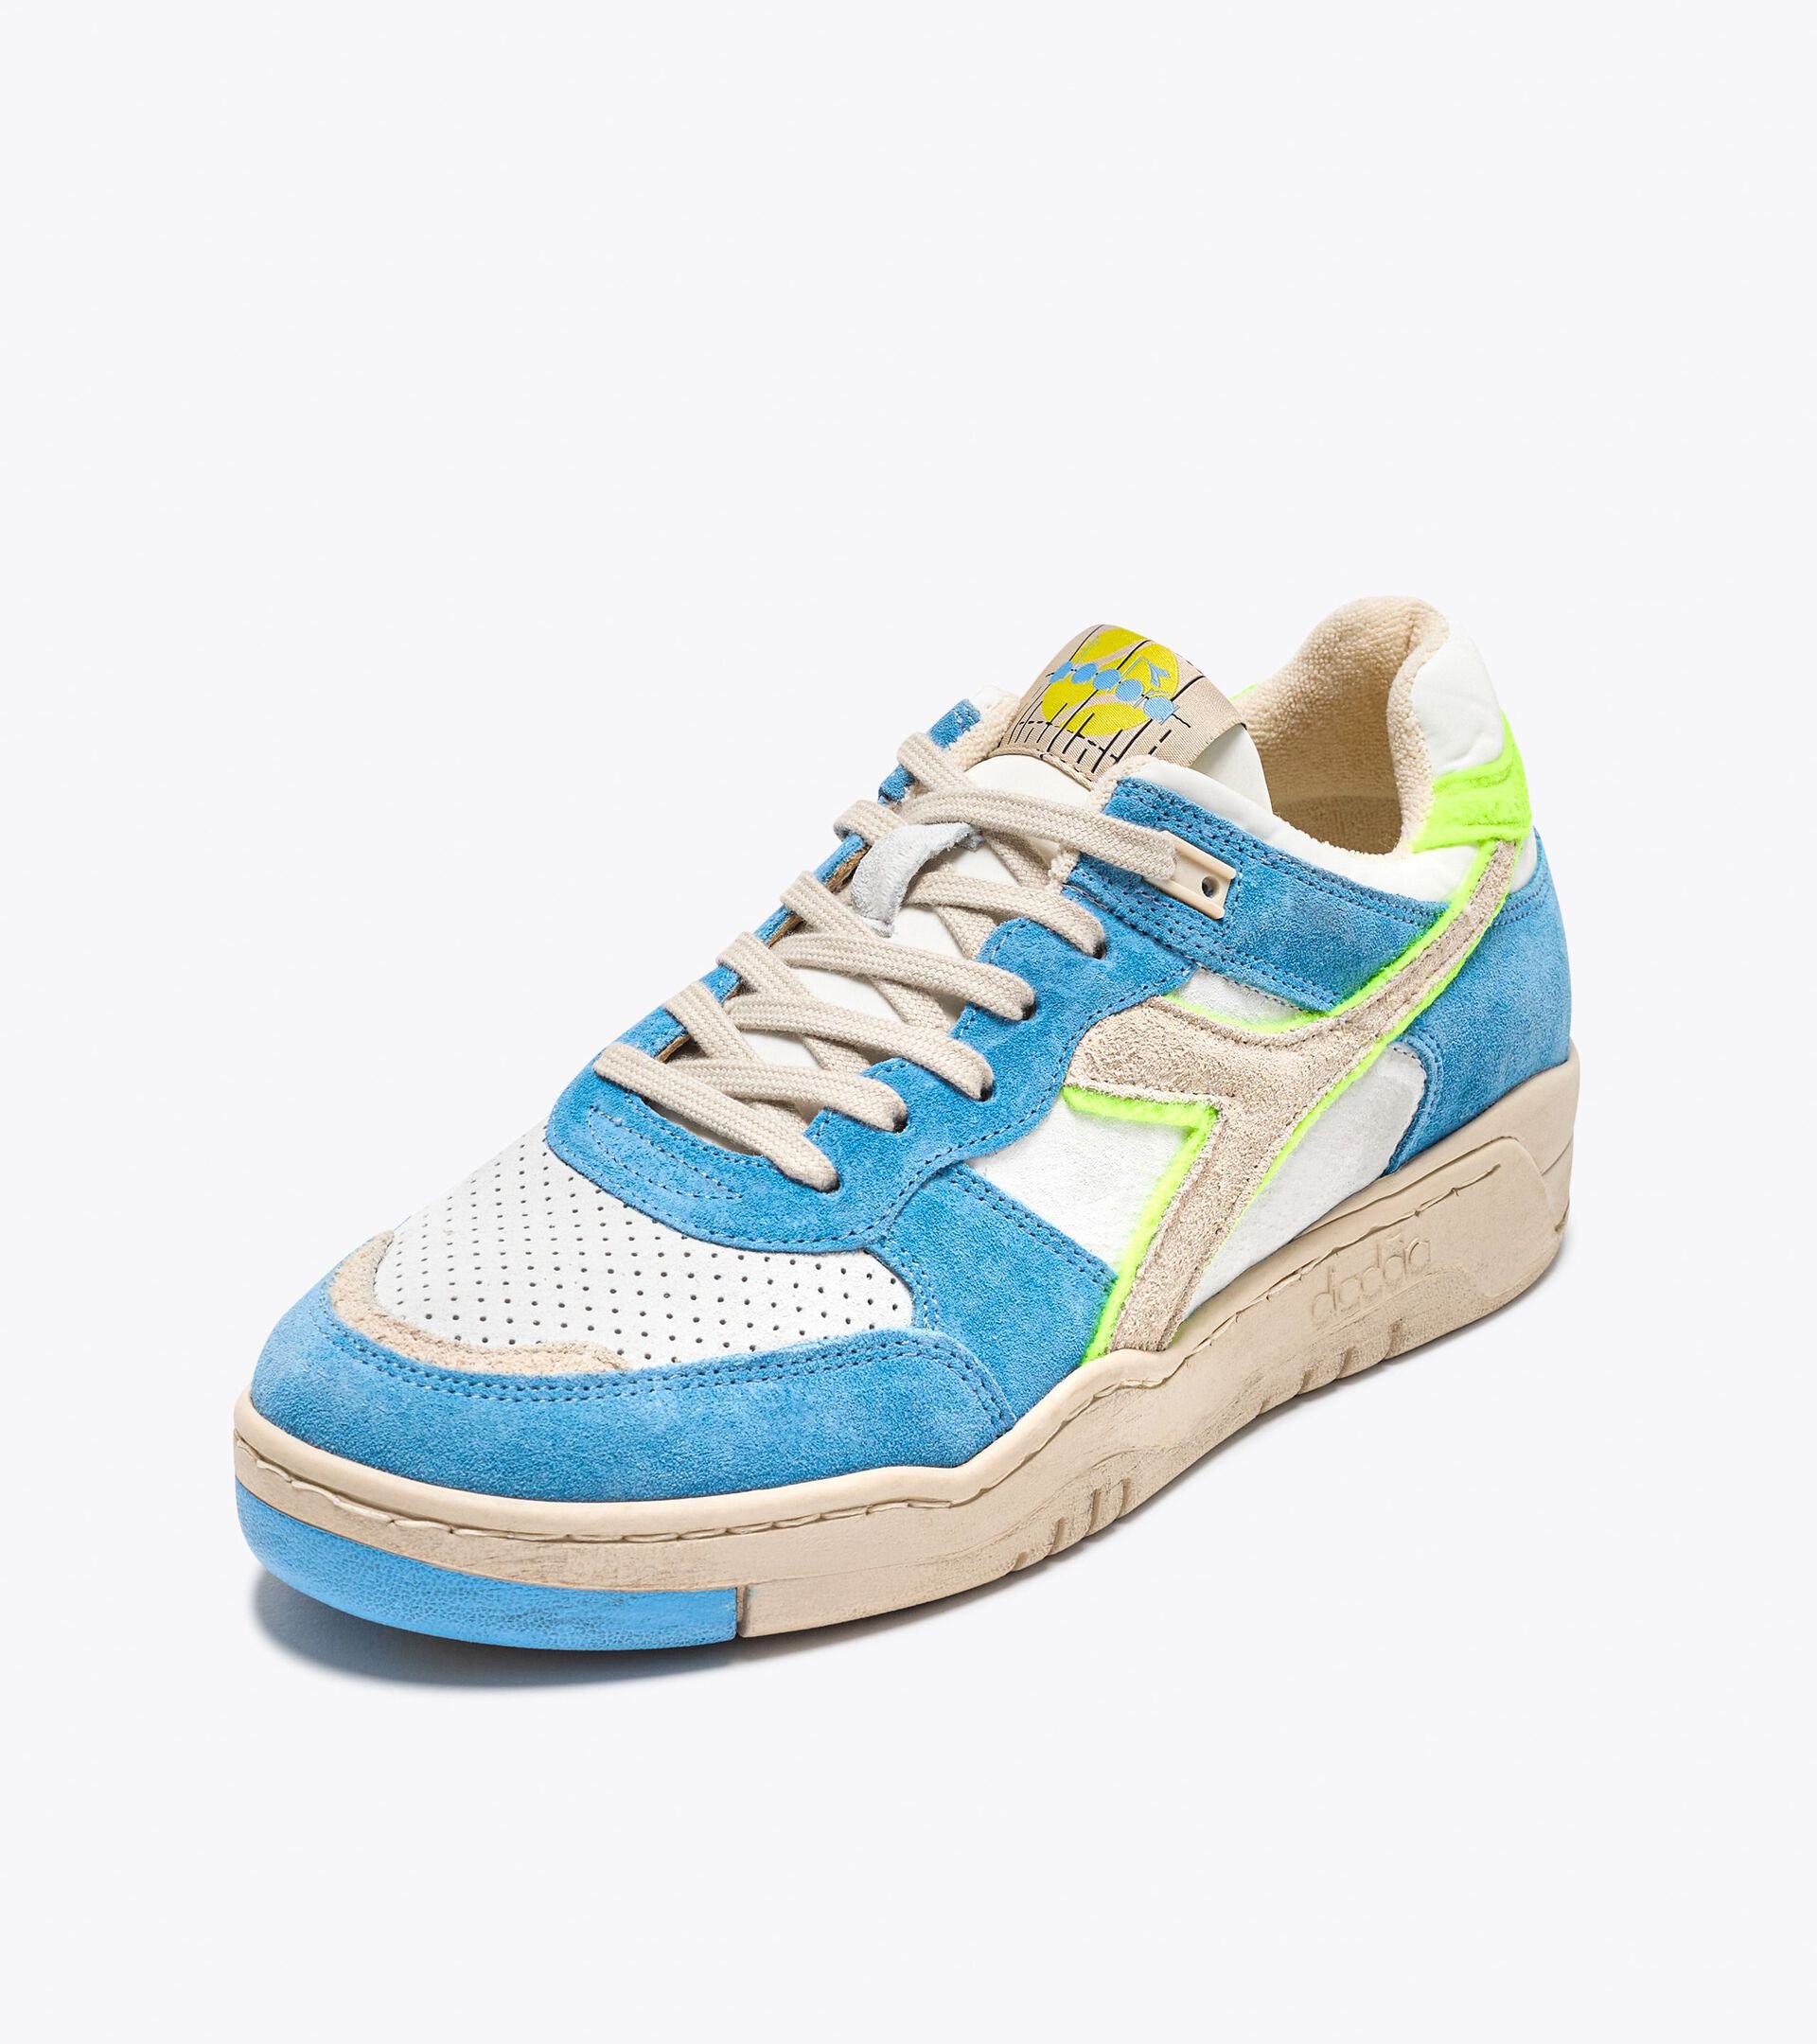 Heritage sneakers - Made in Italy - Gender Neutral 
 B.560 USED AA ITALIA WHITE/BONNIE BLUE - Diadora